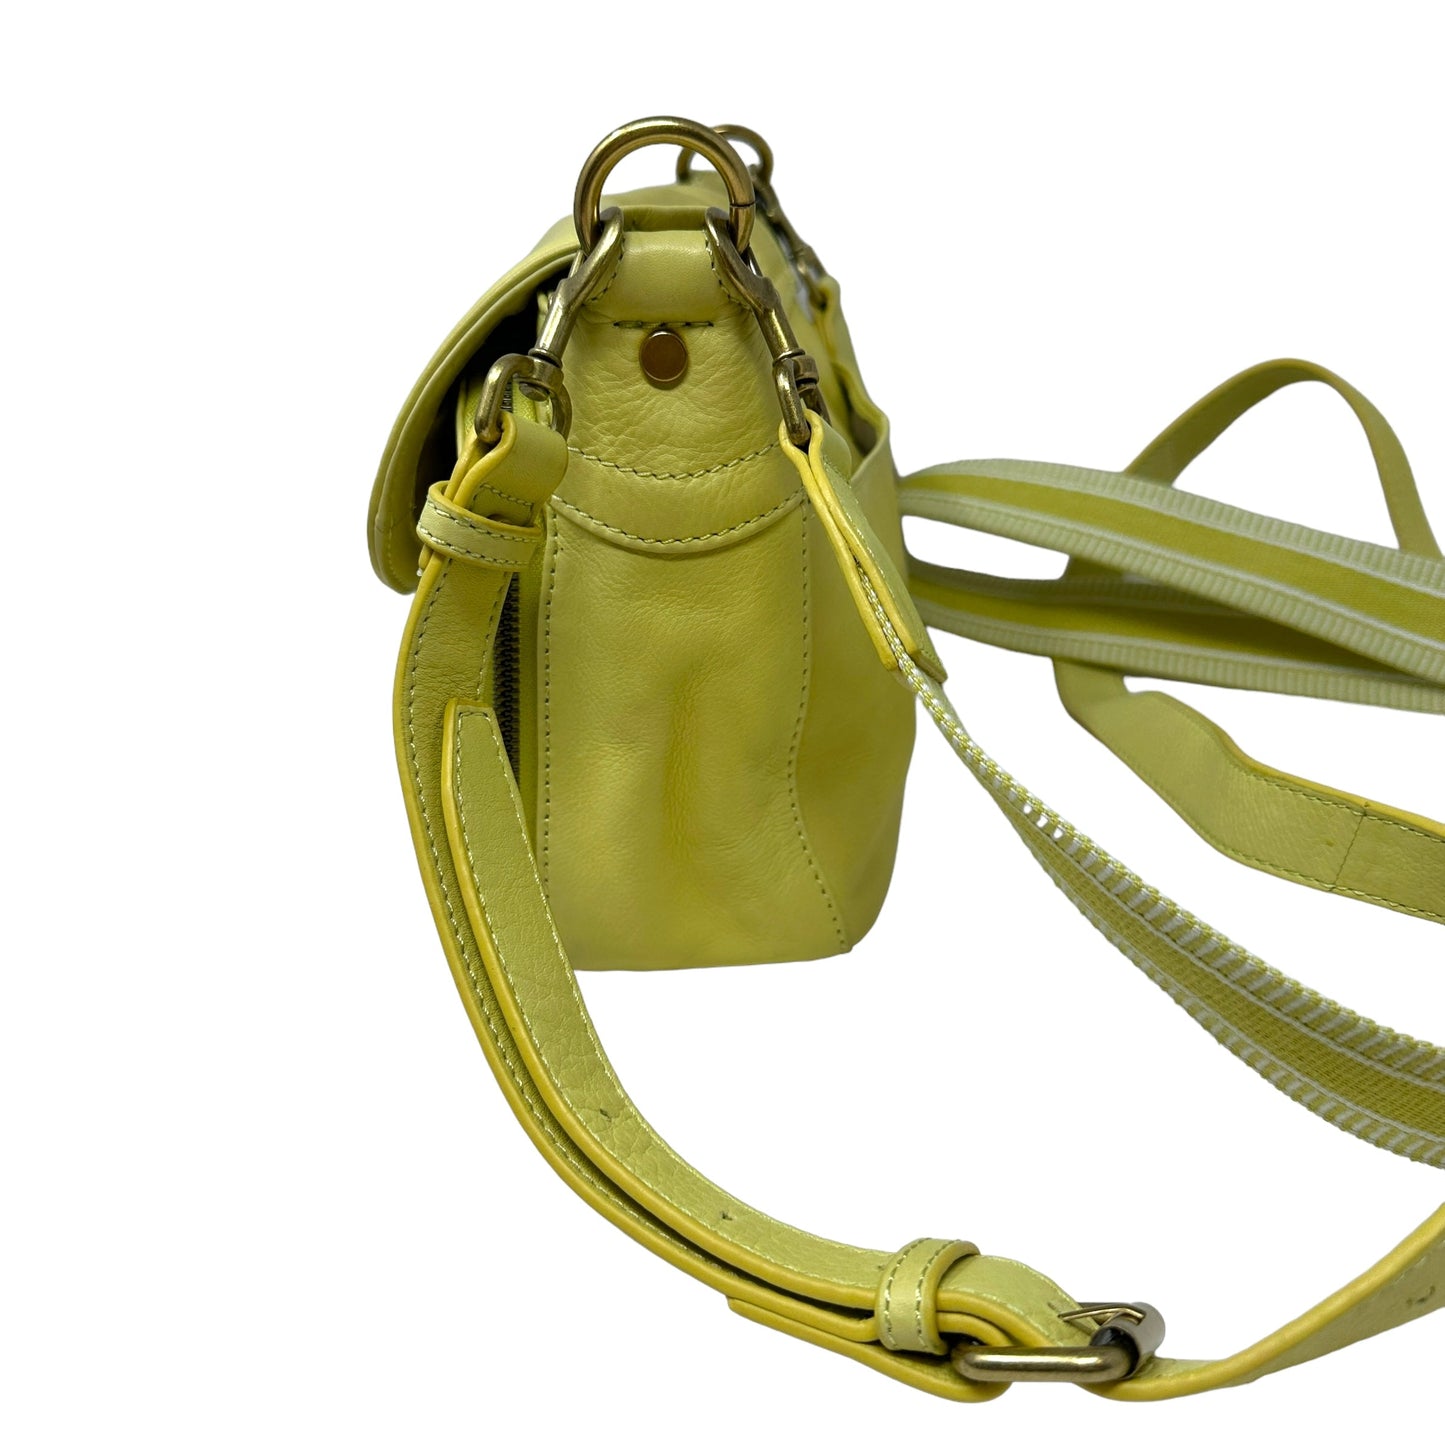 Multifunctional Leather Crossbody With 2 Straps - Citrus Smooth By American Leather Company   Size: Medium